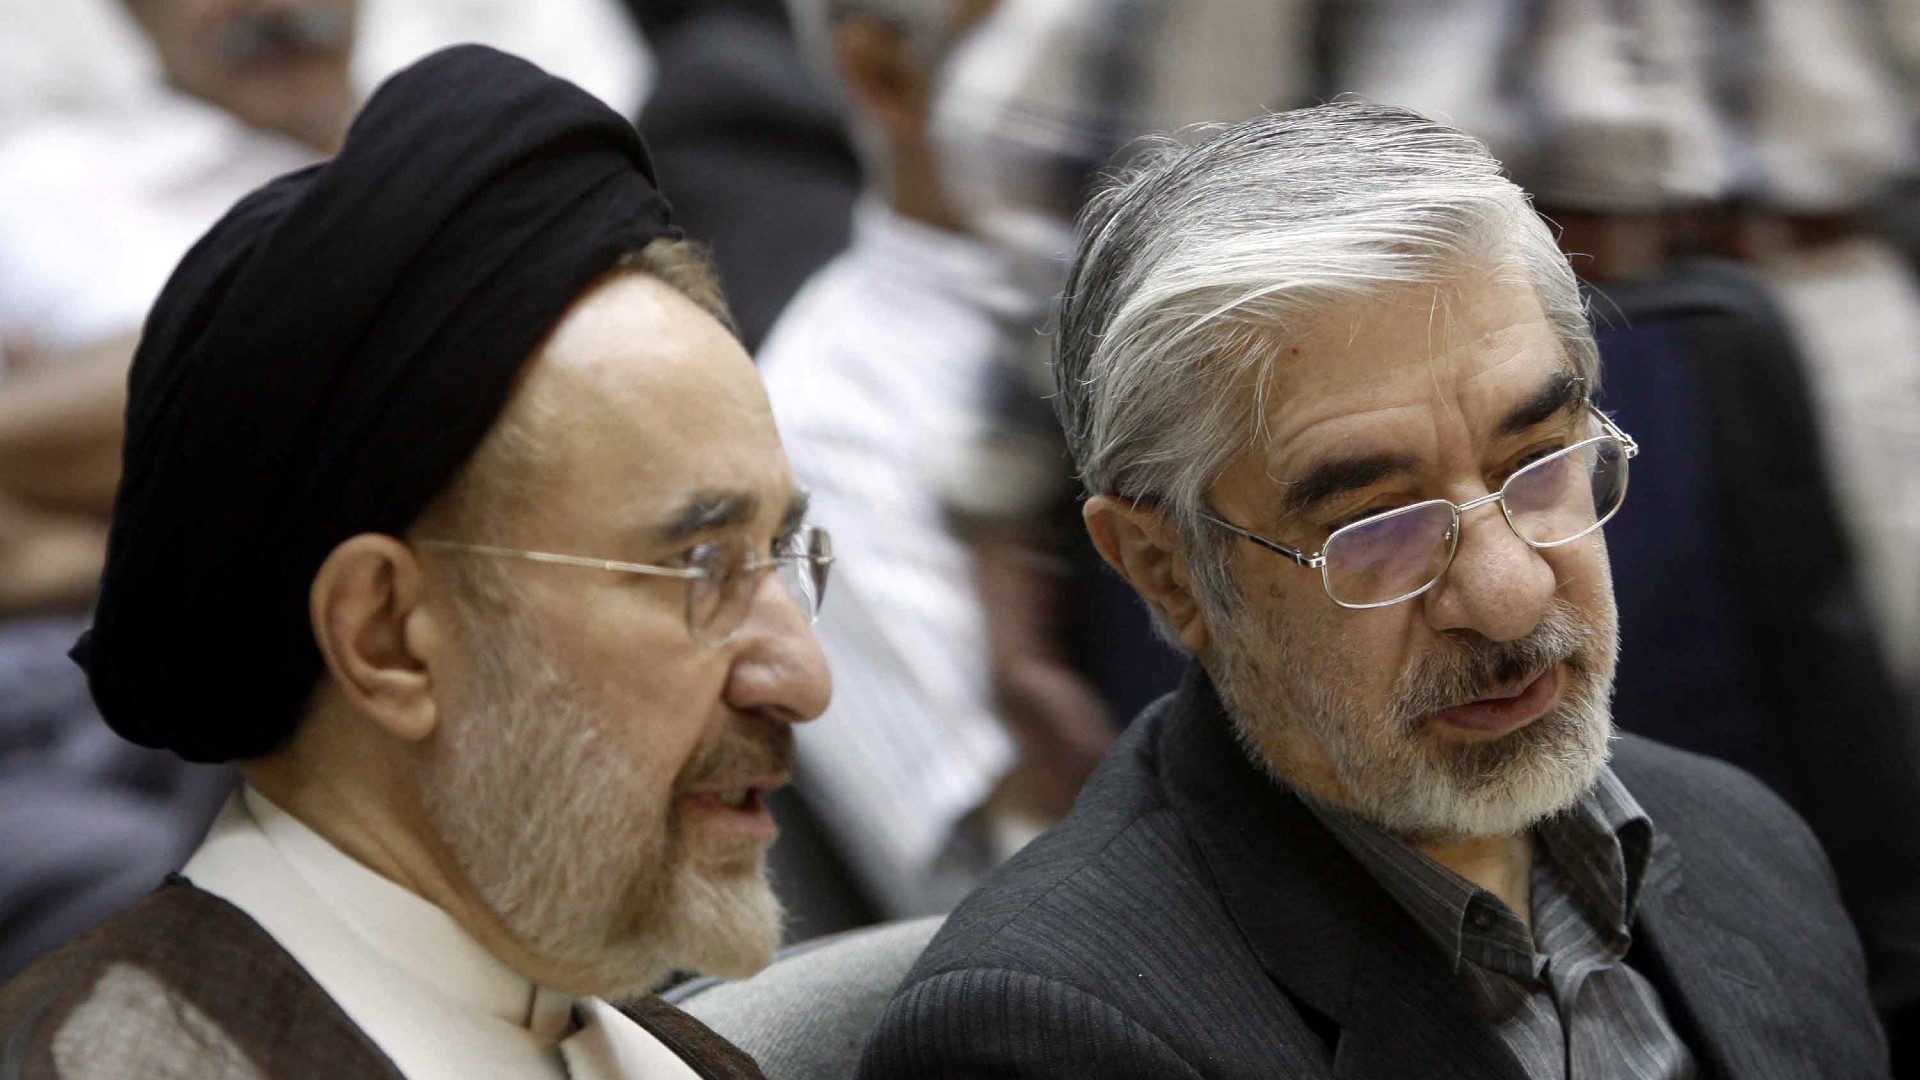 Mir Hossein Mousavi, right, and Mohammad Khatami in 2009. Their views have now diverged (AFP)